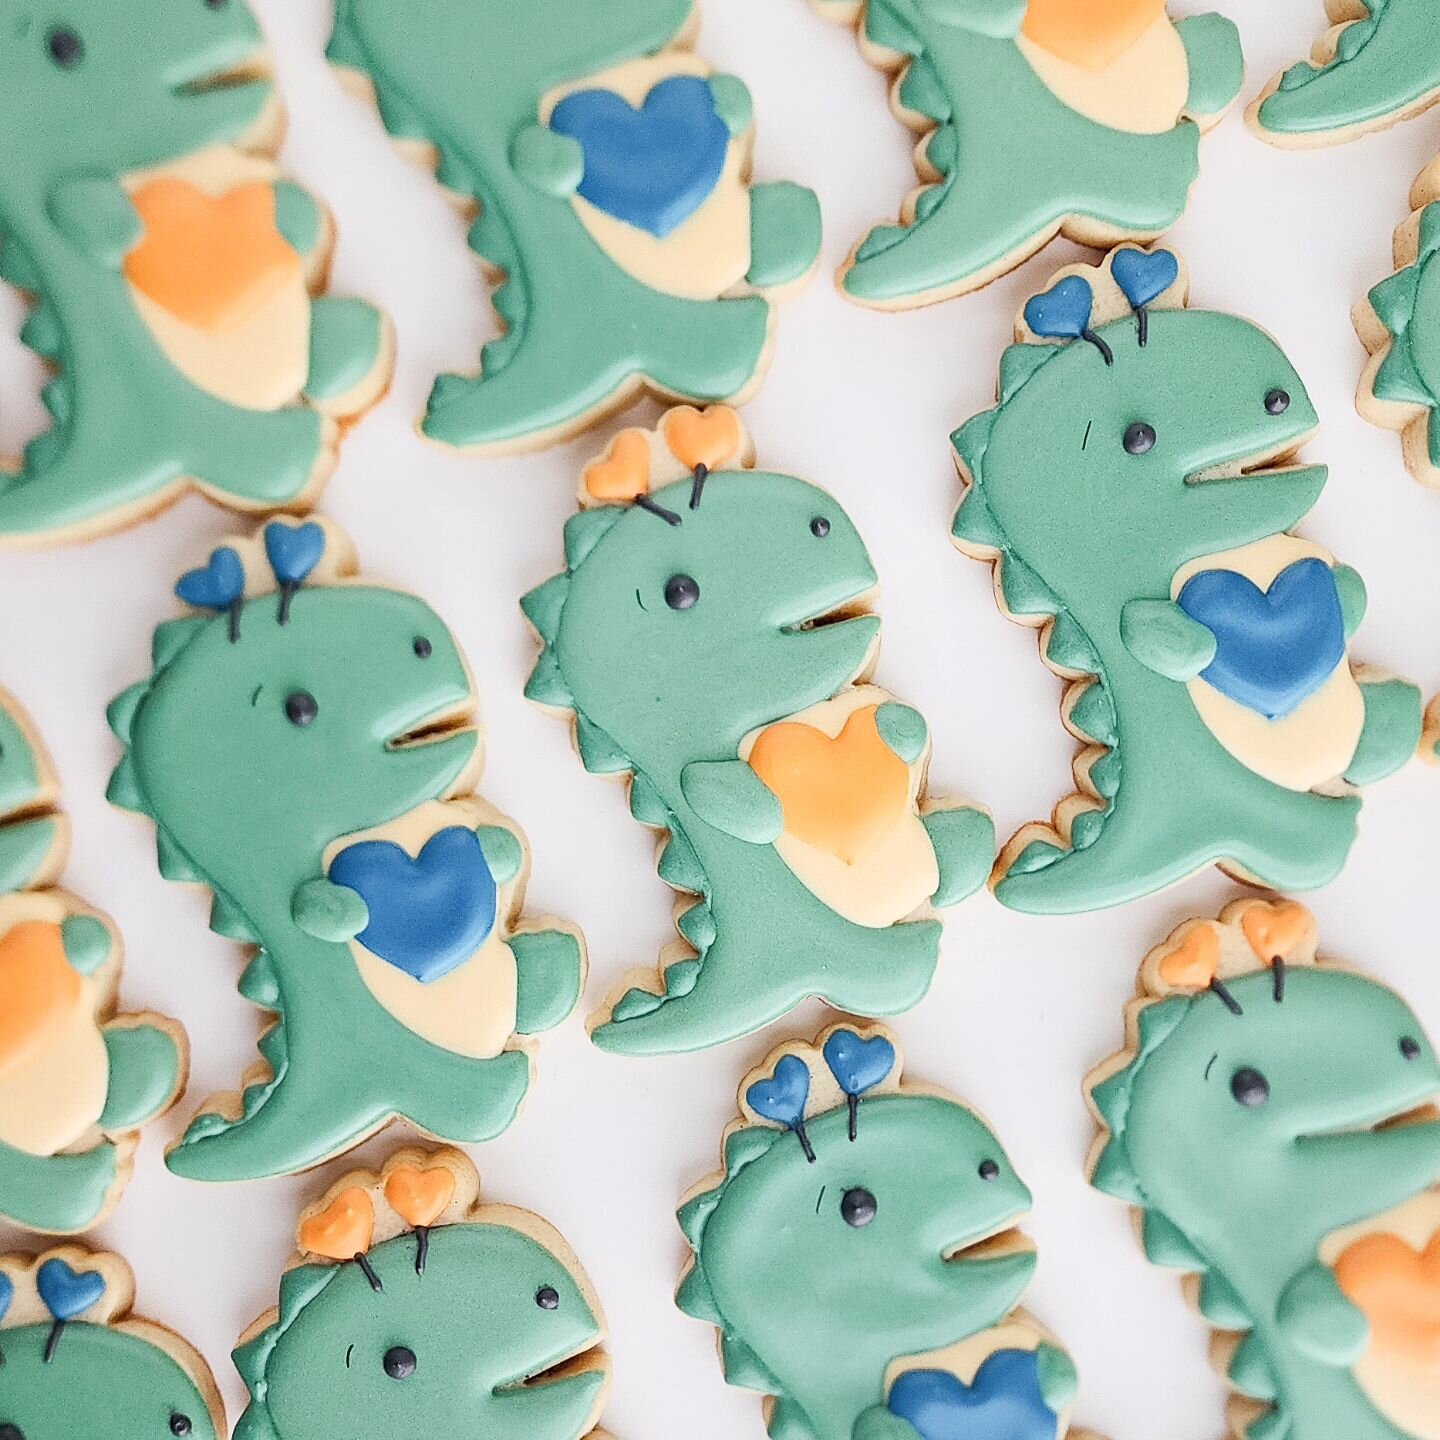 Happy Leap Day!! I couldn't let February end 💙 without sharing these sweet🦖 dinosaur cookies! 
.
.
.
.
.
.
.
#leapyear#dinosaurcookies#custommade#grotonct#ledyardct#iheartyou#ctmade#waterfordct#ctbakery#decoratedsugarcookies#partyfavors#mysticct#th